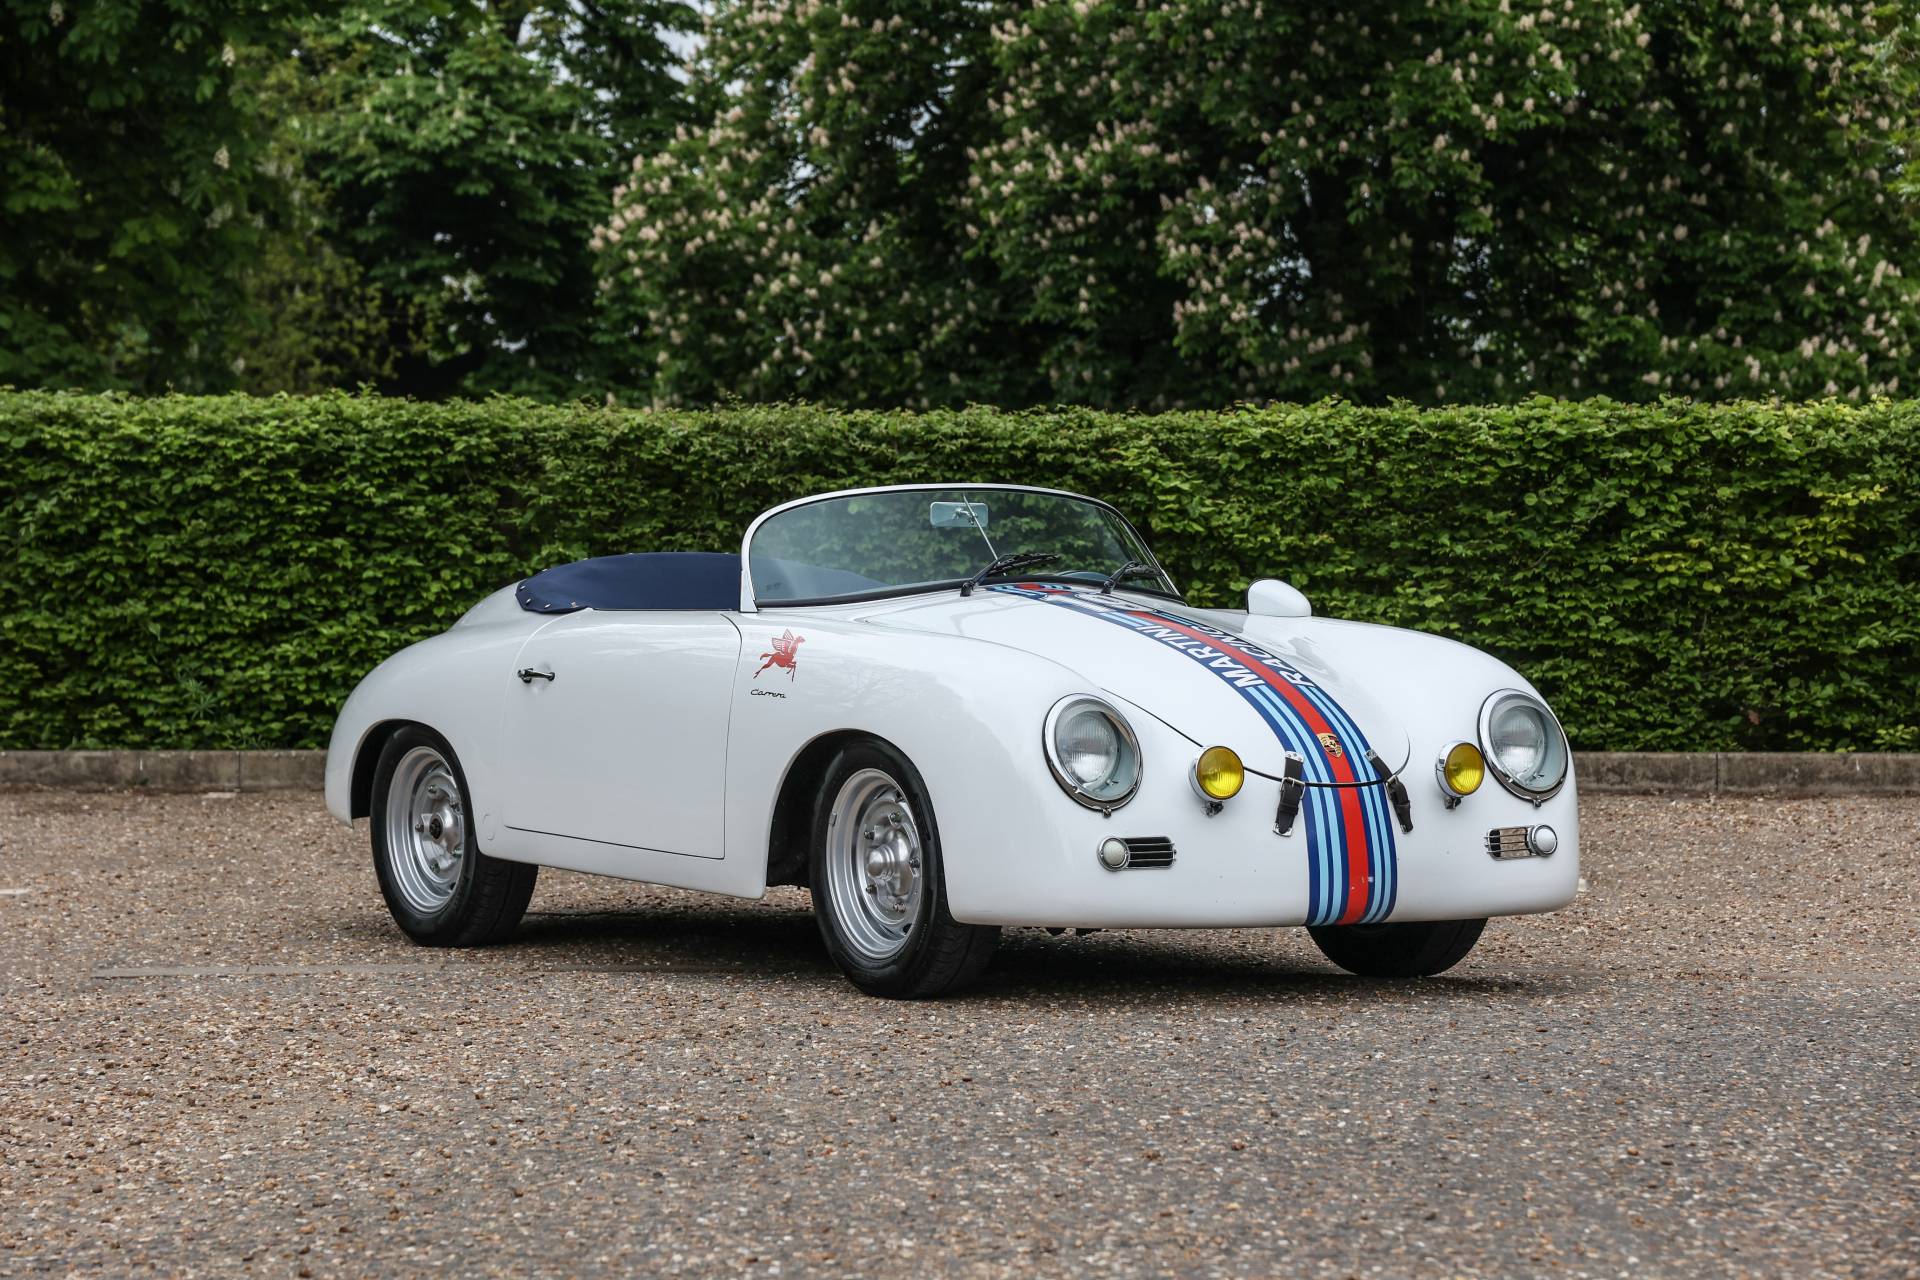 For Sale: Porsche 356 Carrera Speedster Tribute (1960) offered for GBP  70,000